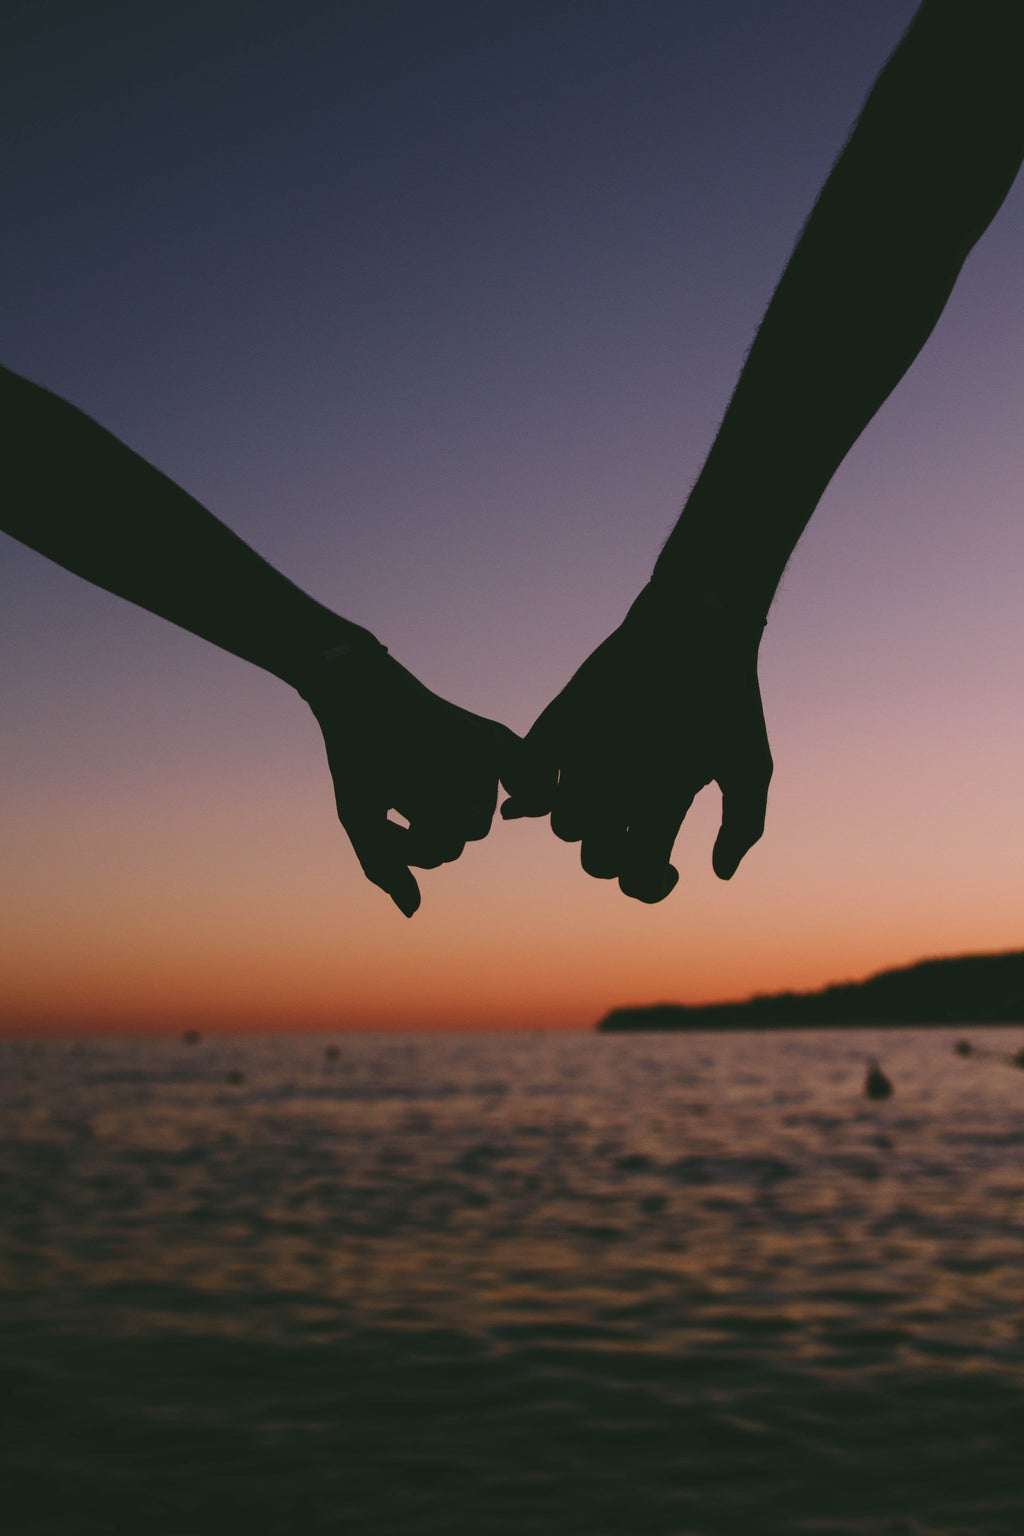 holding hands at sunset